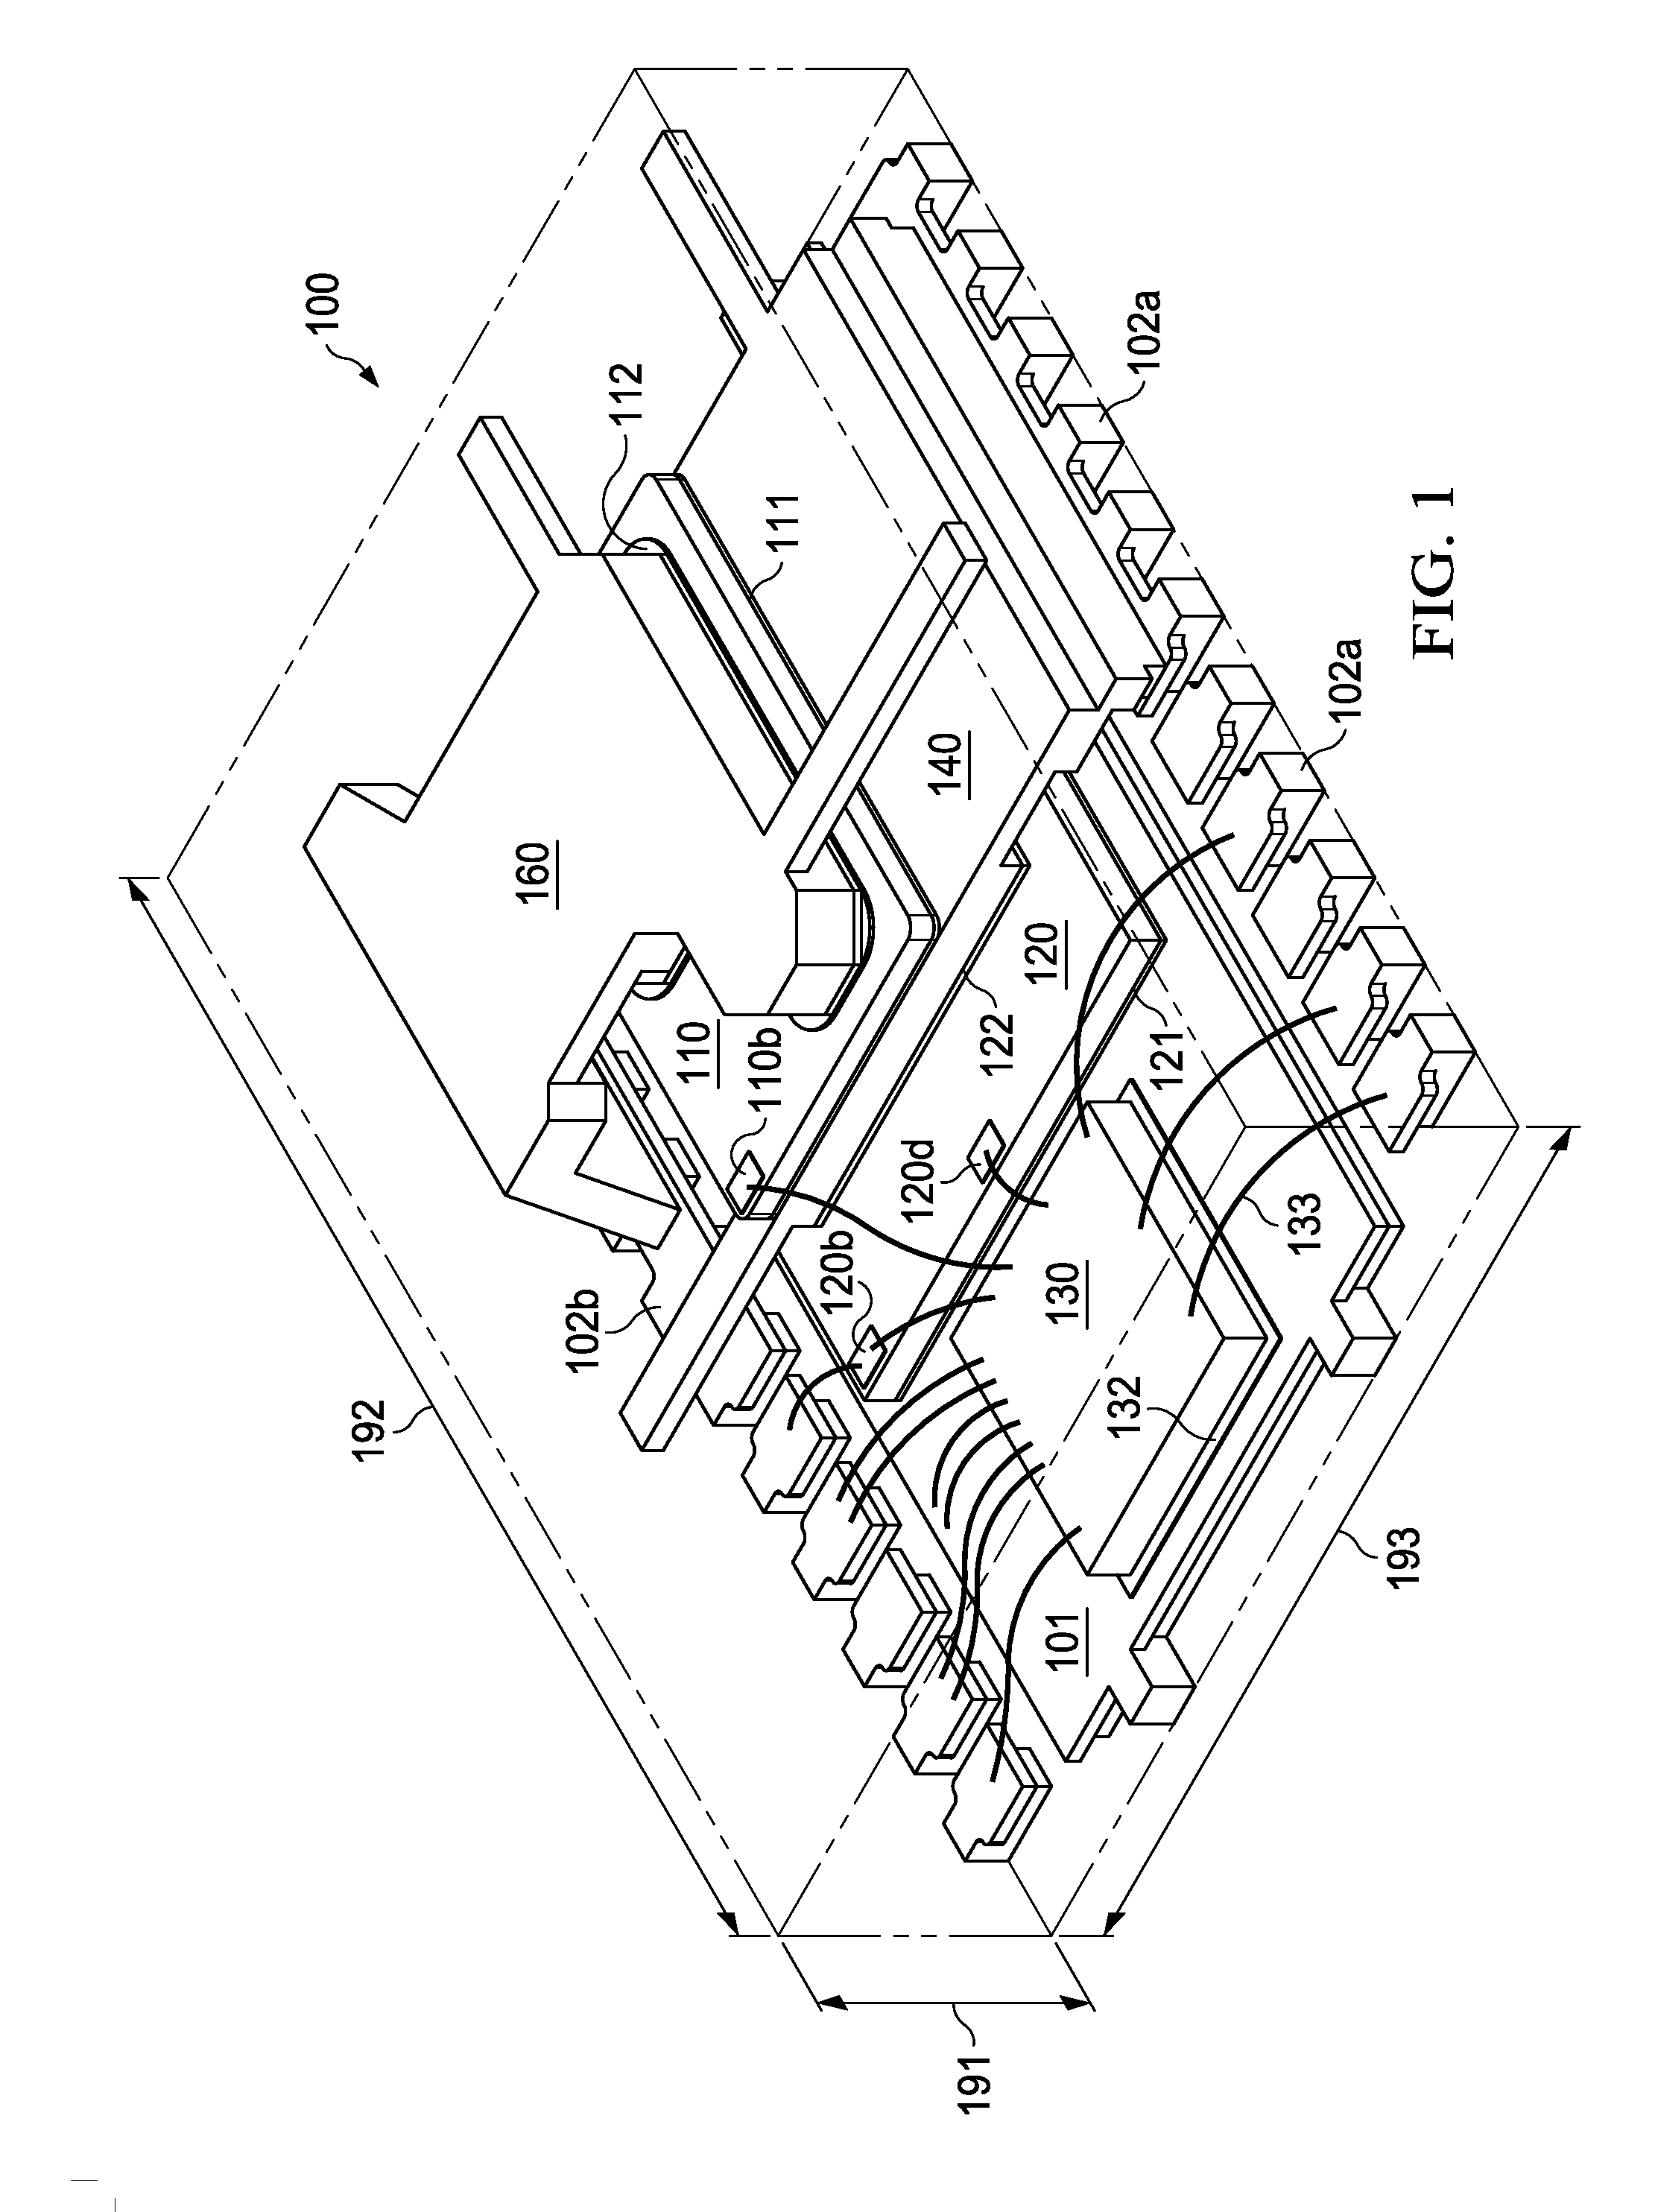 Stacked Synchronous Buck Converter Having Chip Embedded in Outside Recess of Leadframe